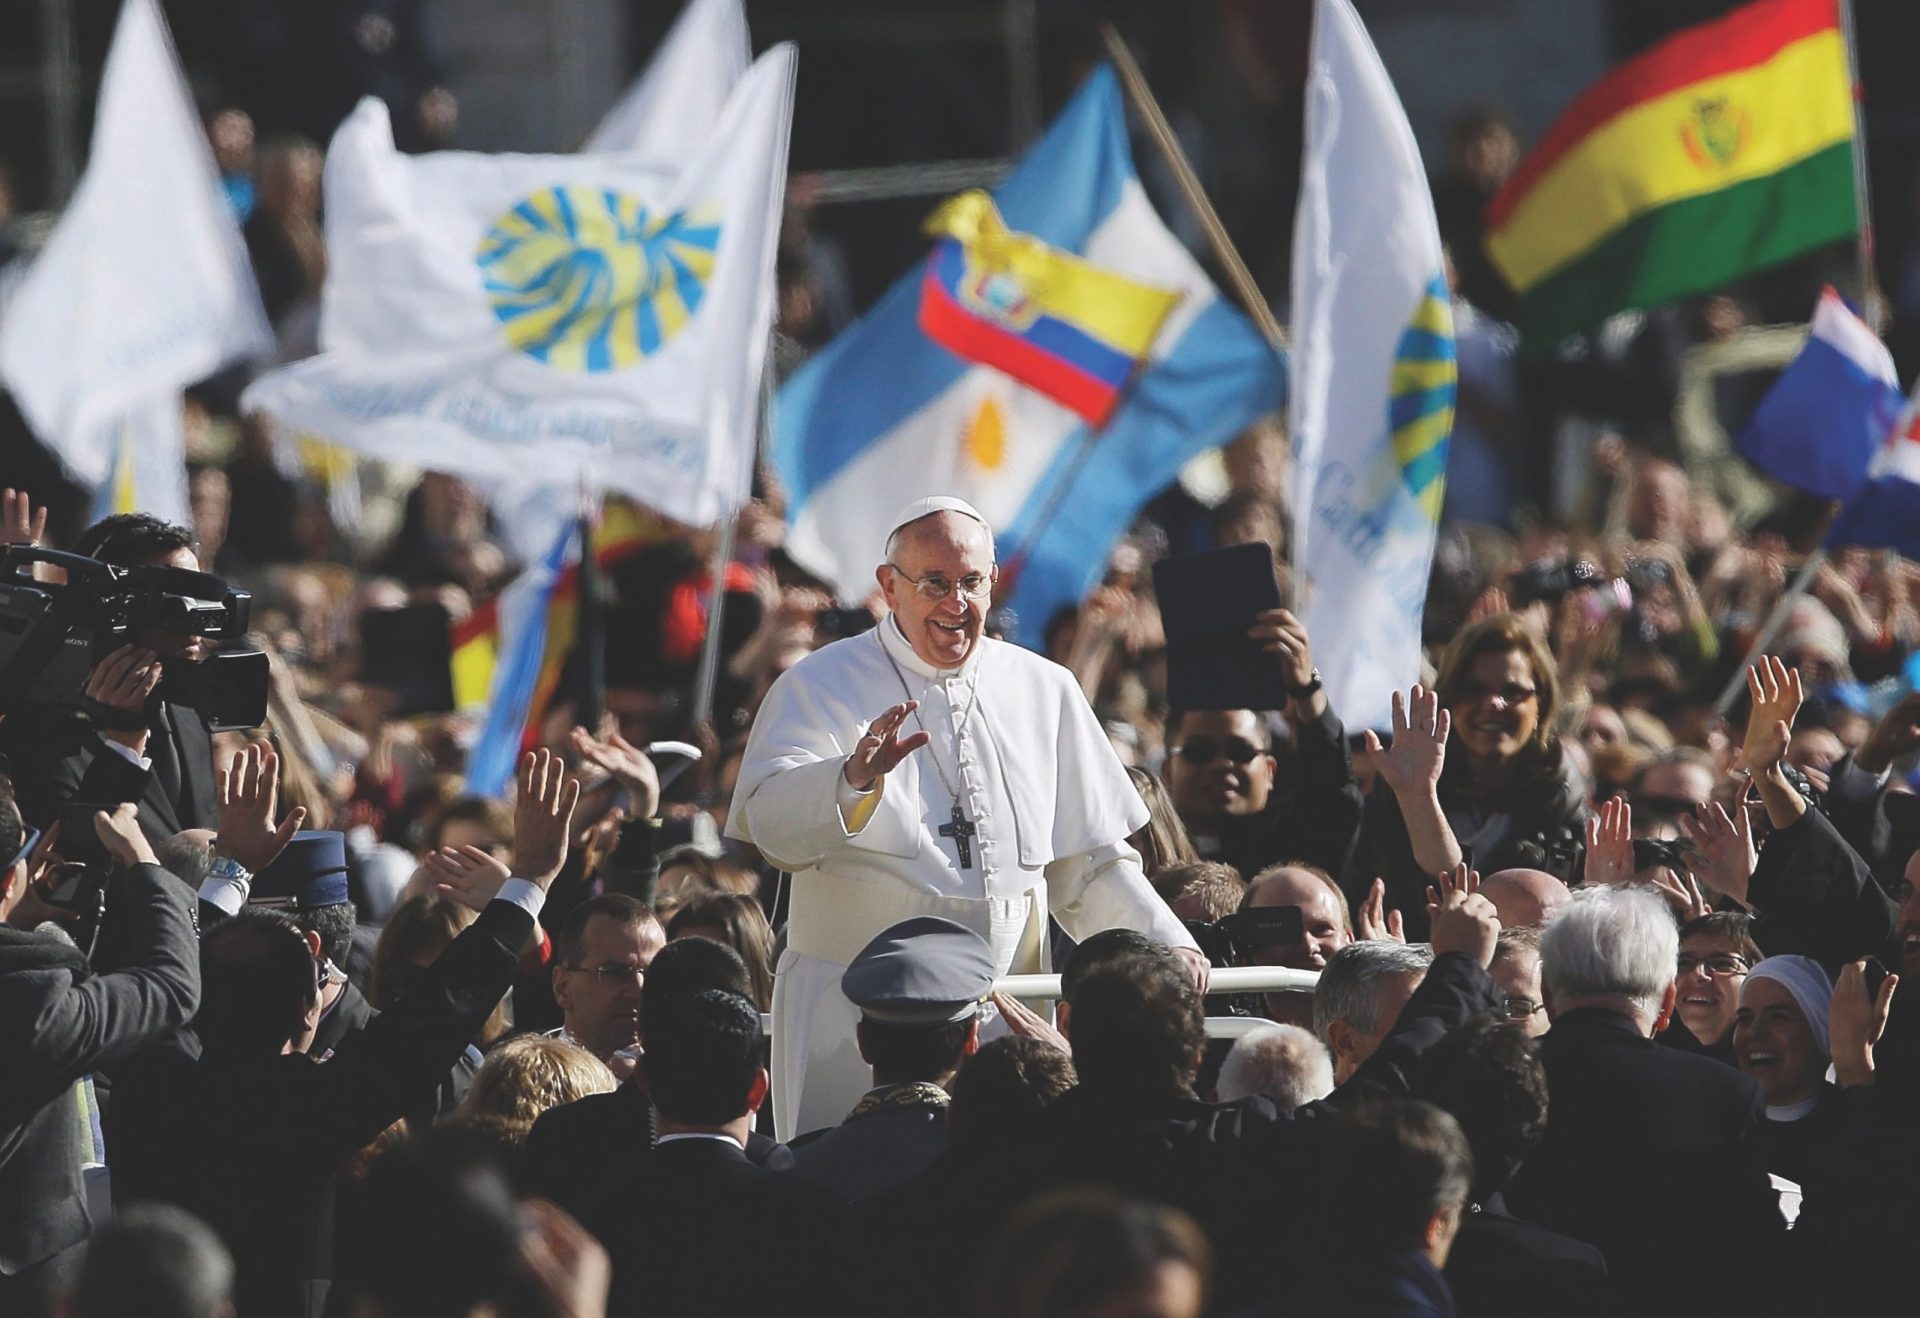 Pope Francis surrounded by crowds